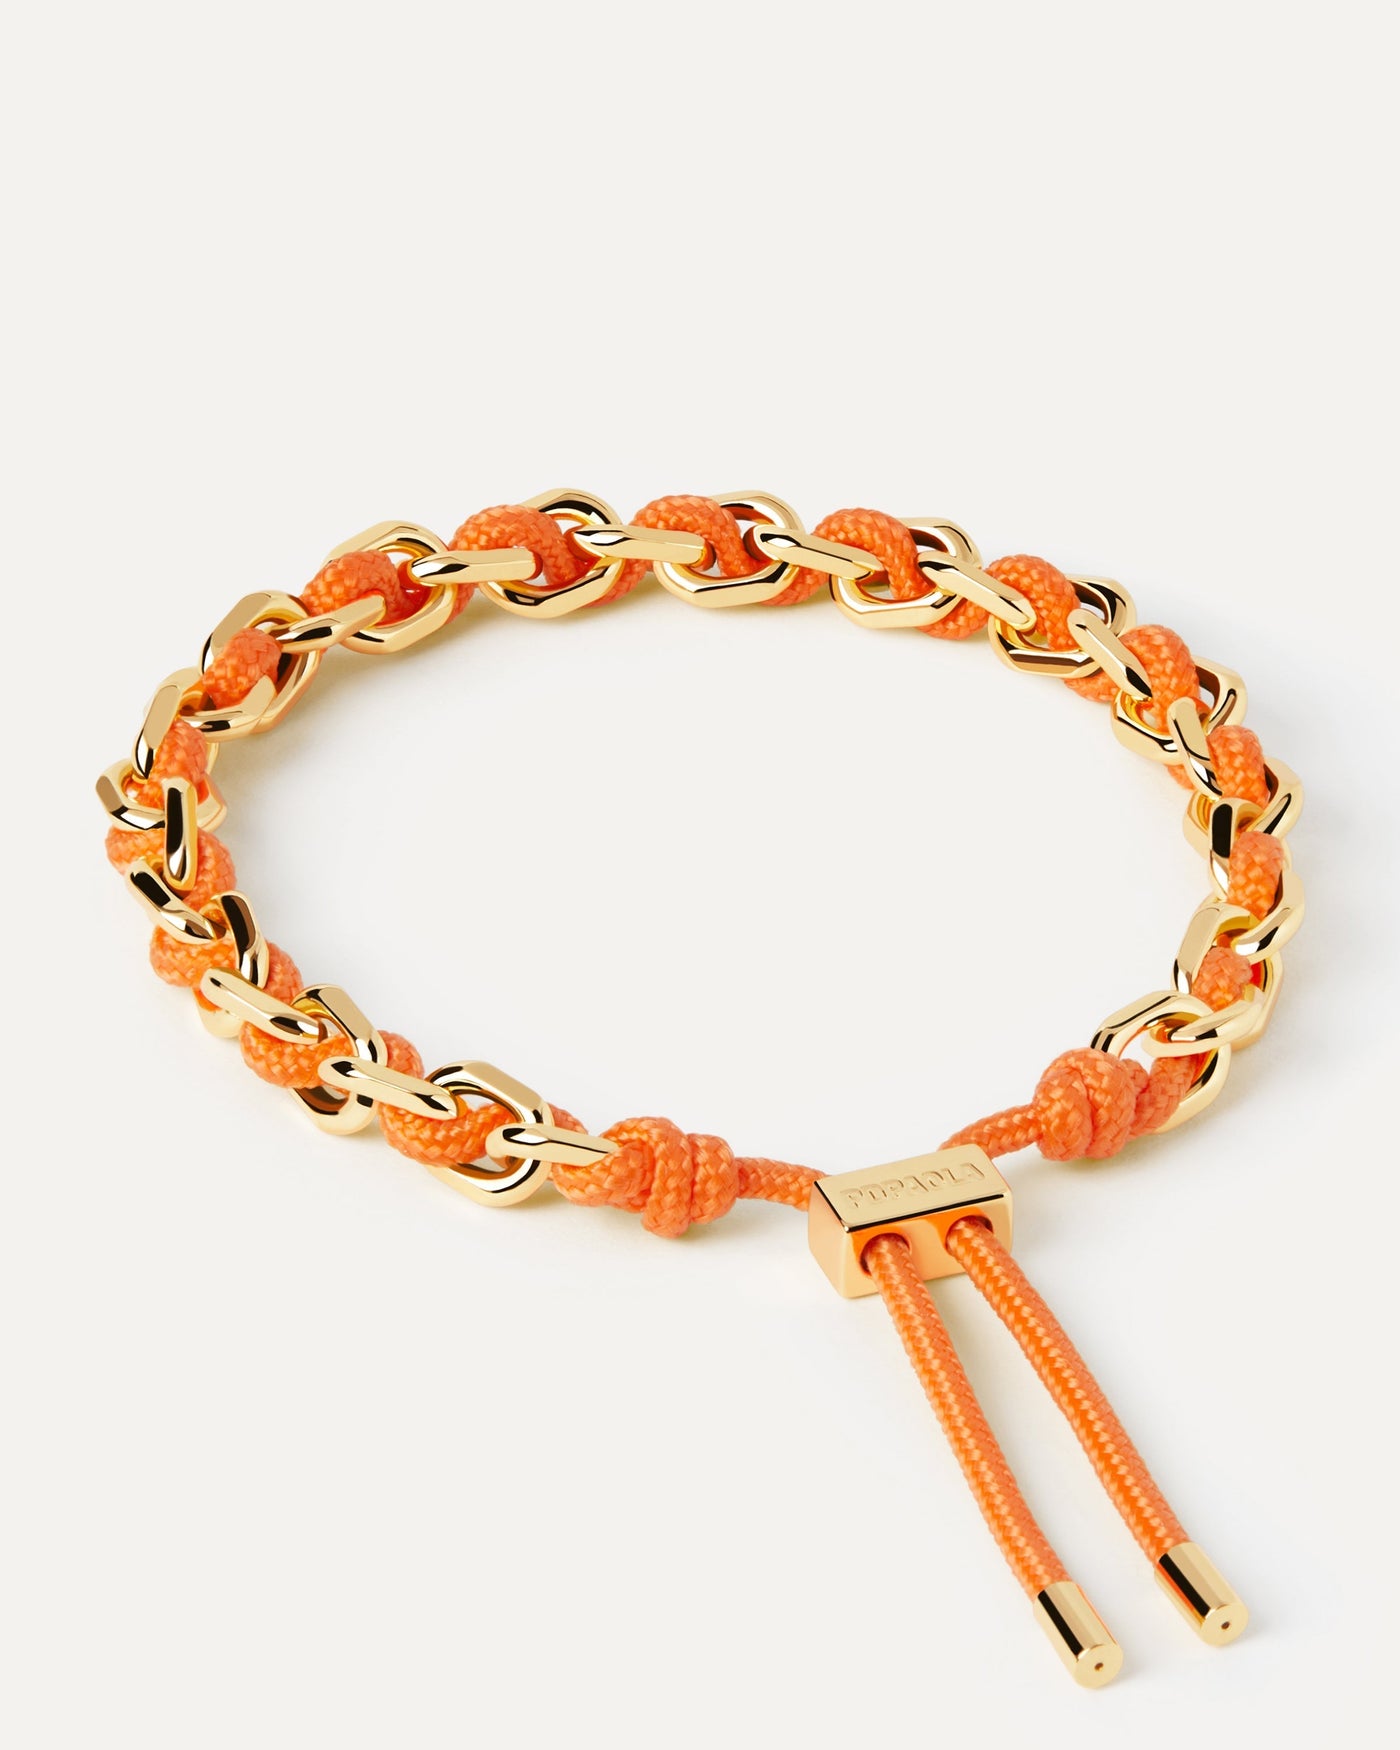 2023 Selection | Tangerine Rope and Chain Bracelet. Golden chain bracelet with an orange rope adjustable sliding clasp. Get the latest arrival from PDPAOLA. Place your order safely and get this Best Seller. Free Shipping.